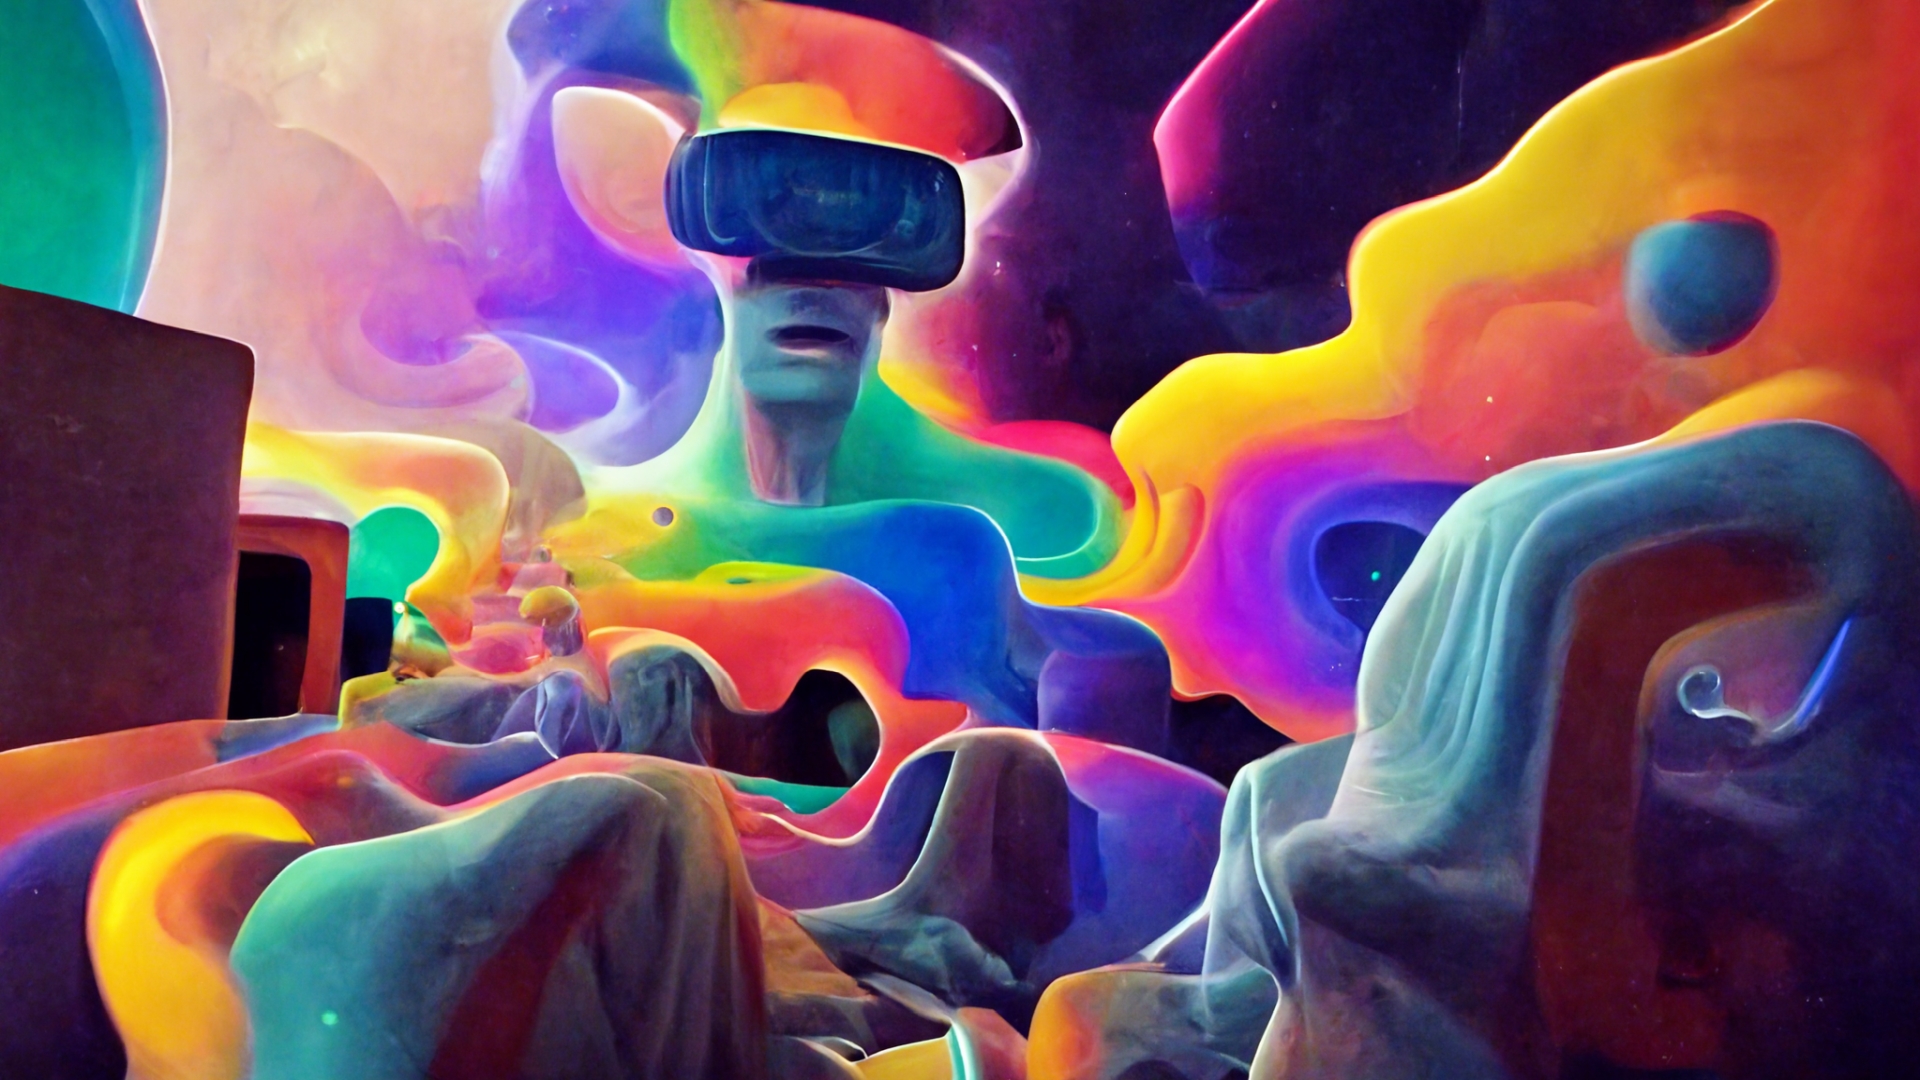 Forget LSD, virtual reality is just as trippy